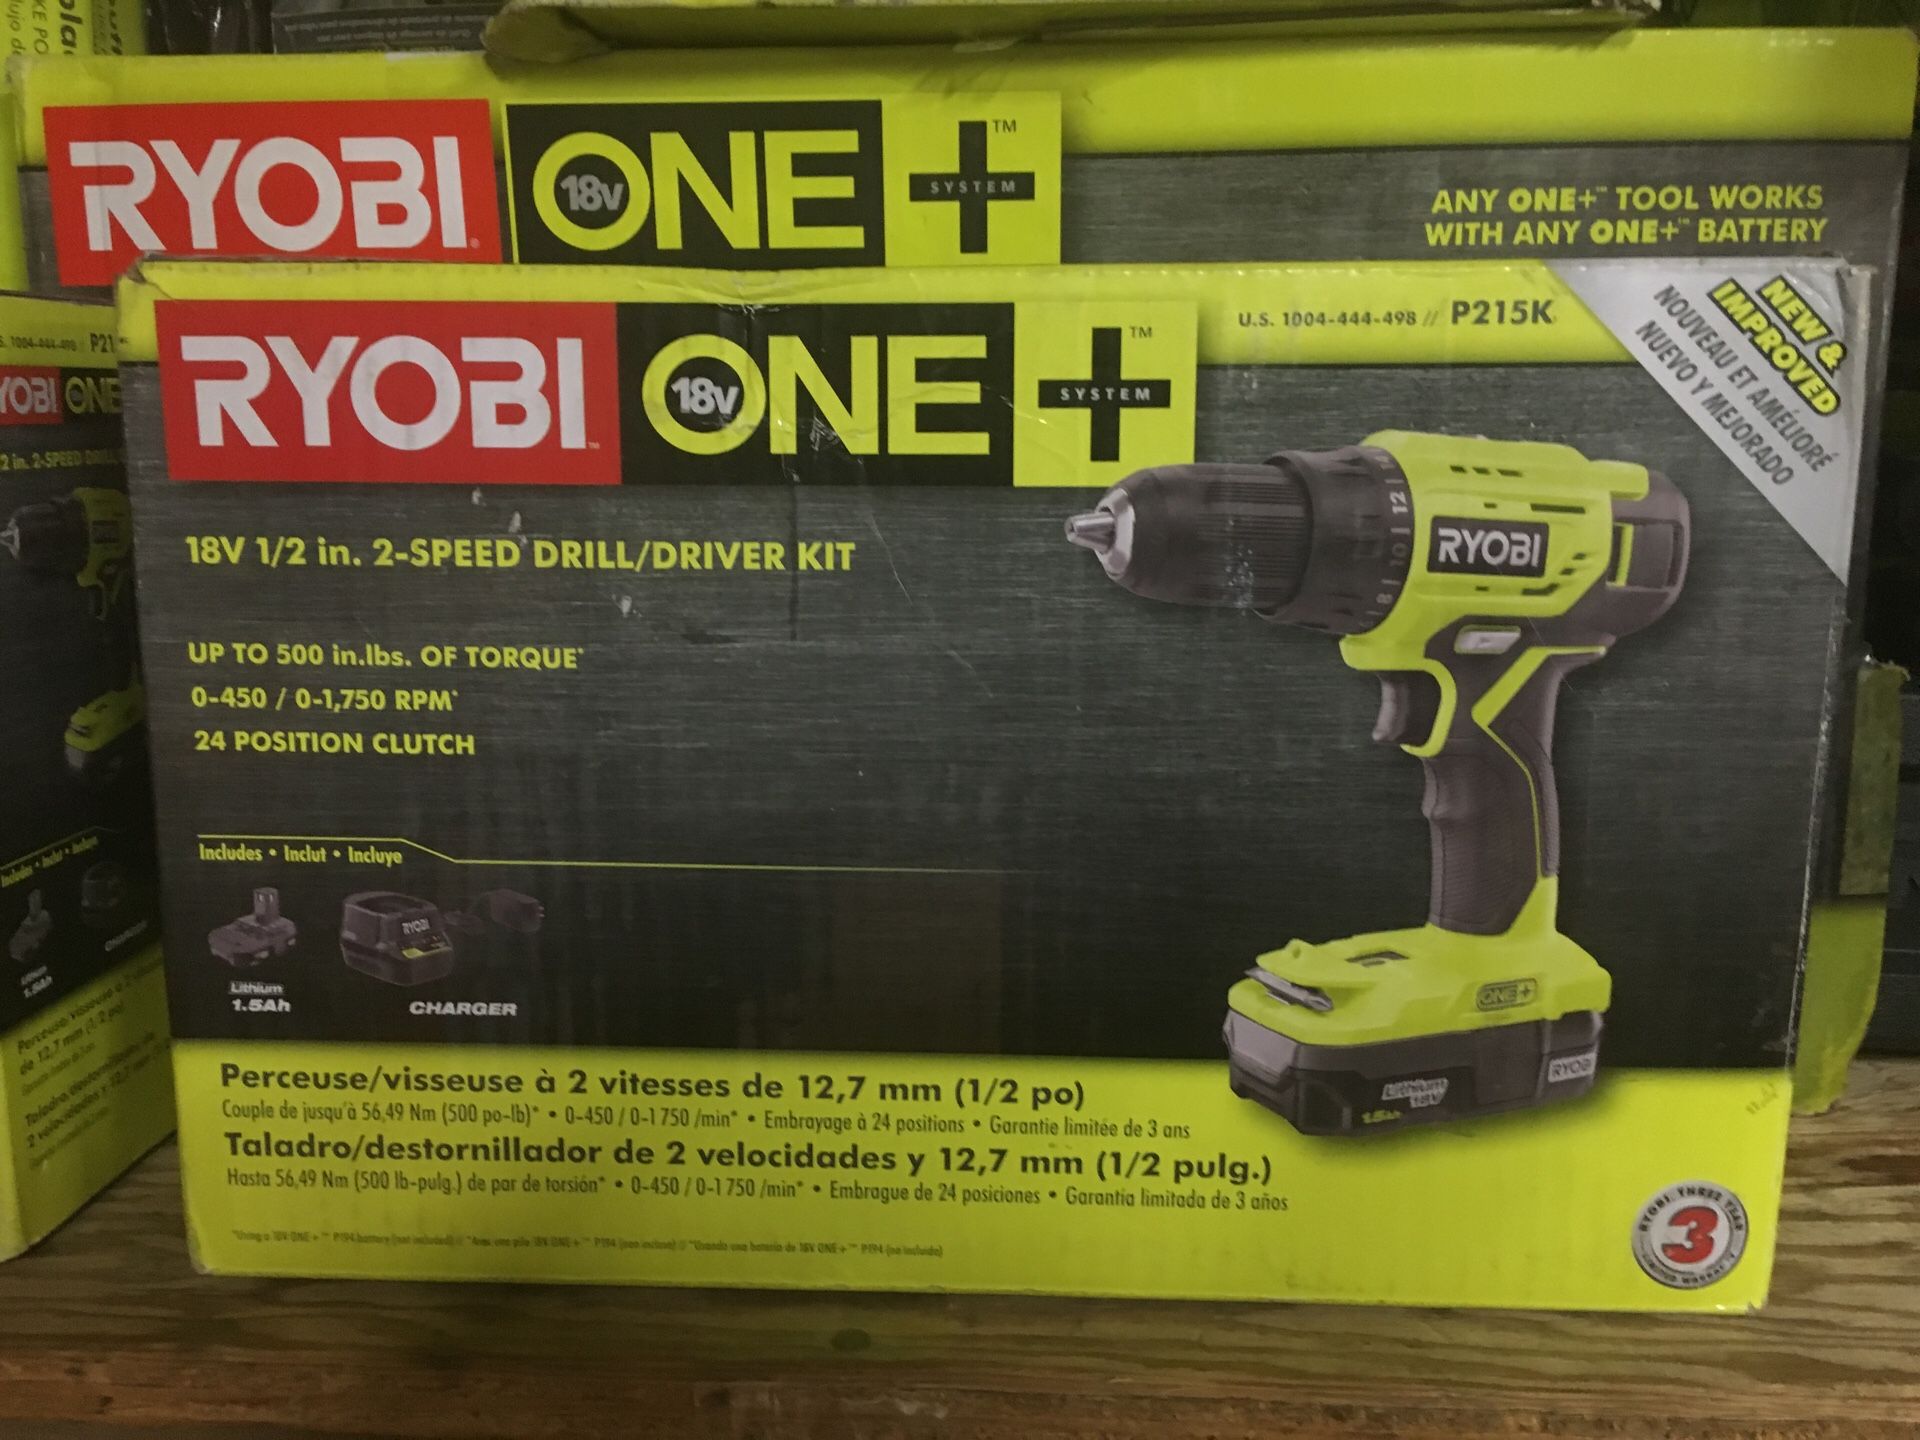 RYOBI 18-Volt ONE+ Lithium-Ion Cordless 1/2 in. Drill/Driver Kit with (1) 1.5 Ah Battery and 18-Volt Charger